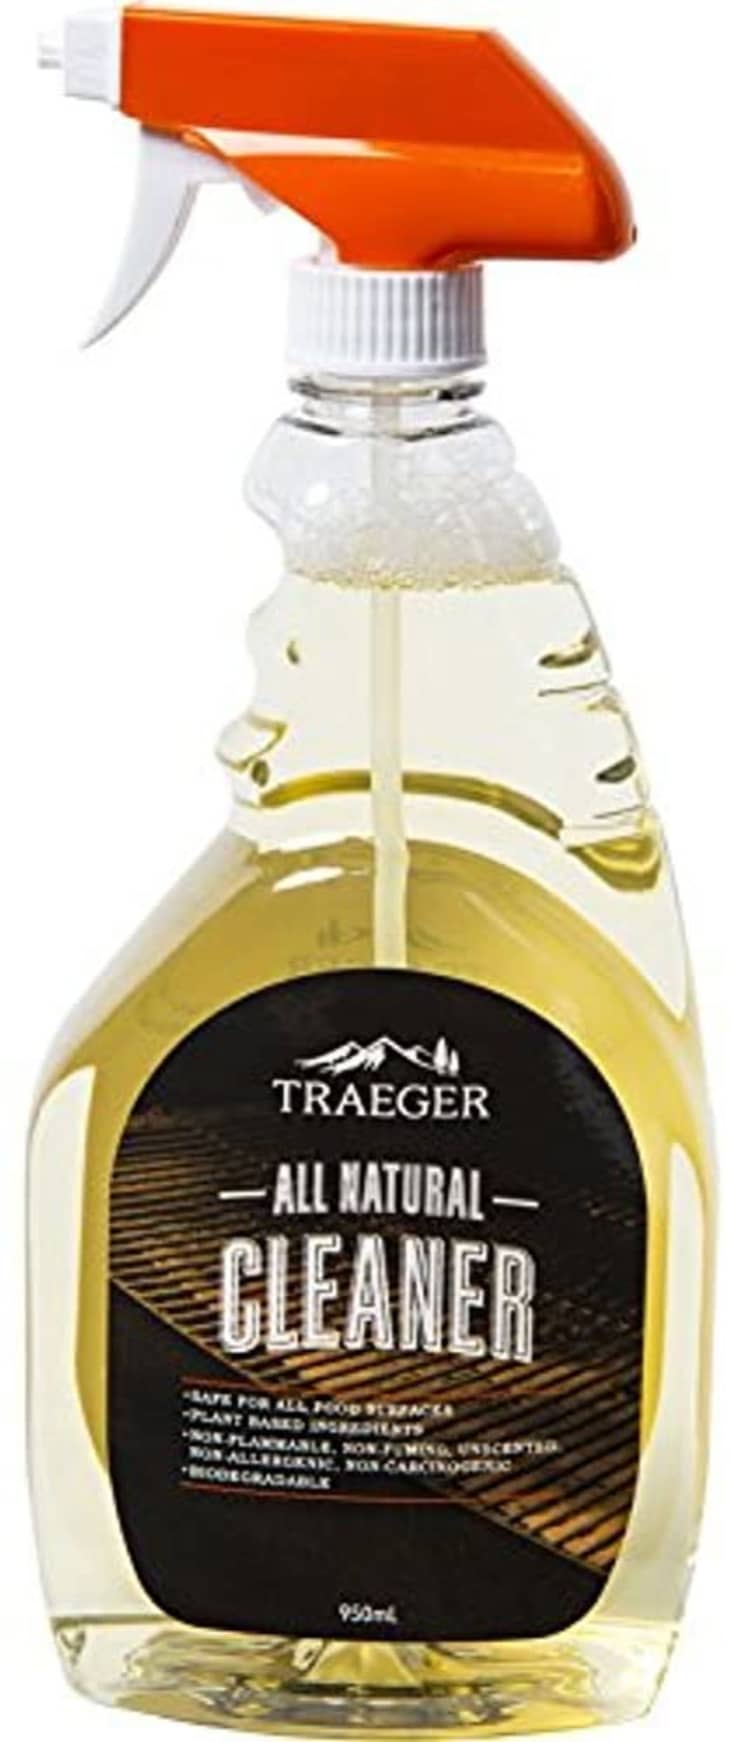 Traeger All Natural Grill Cleaner at Amazon